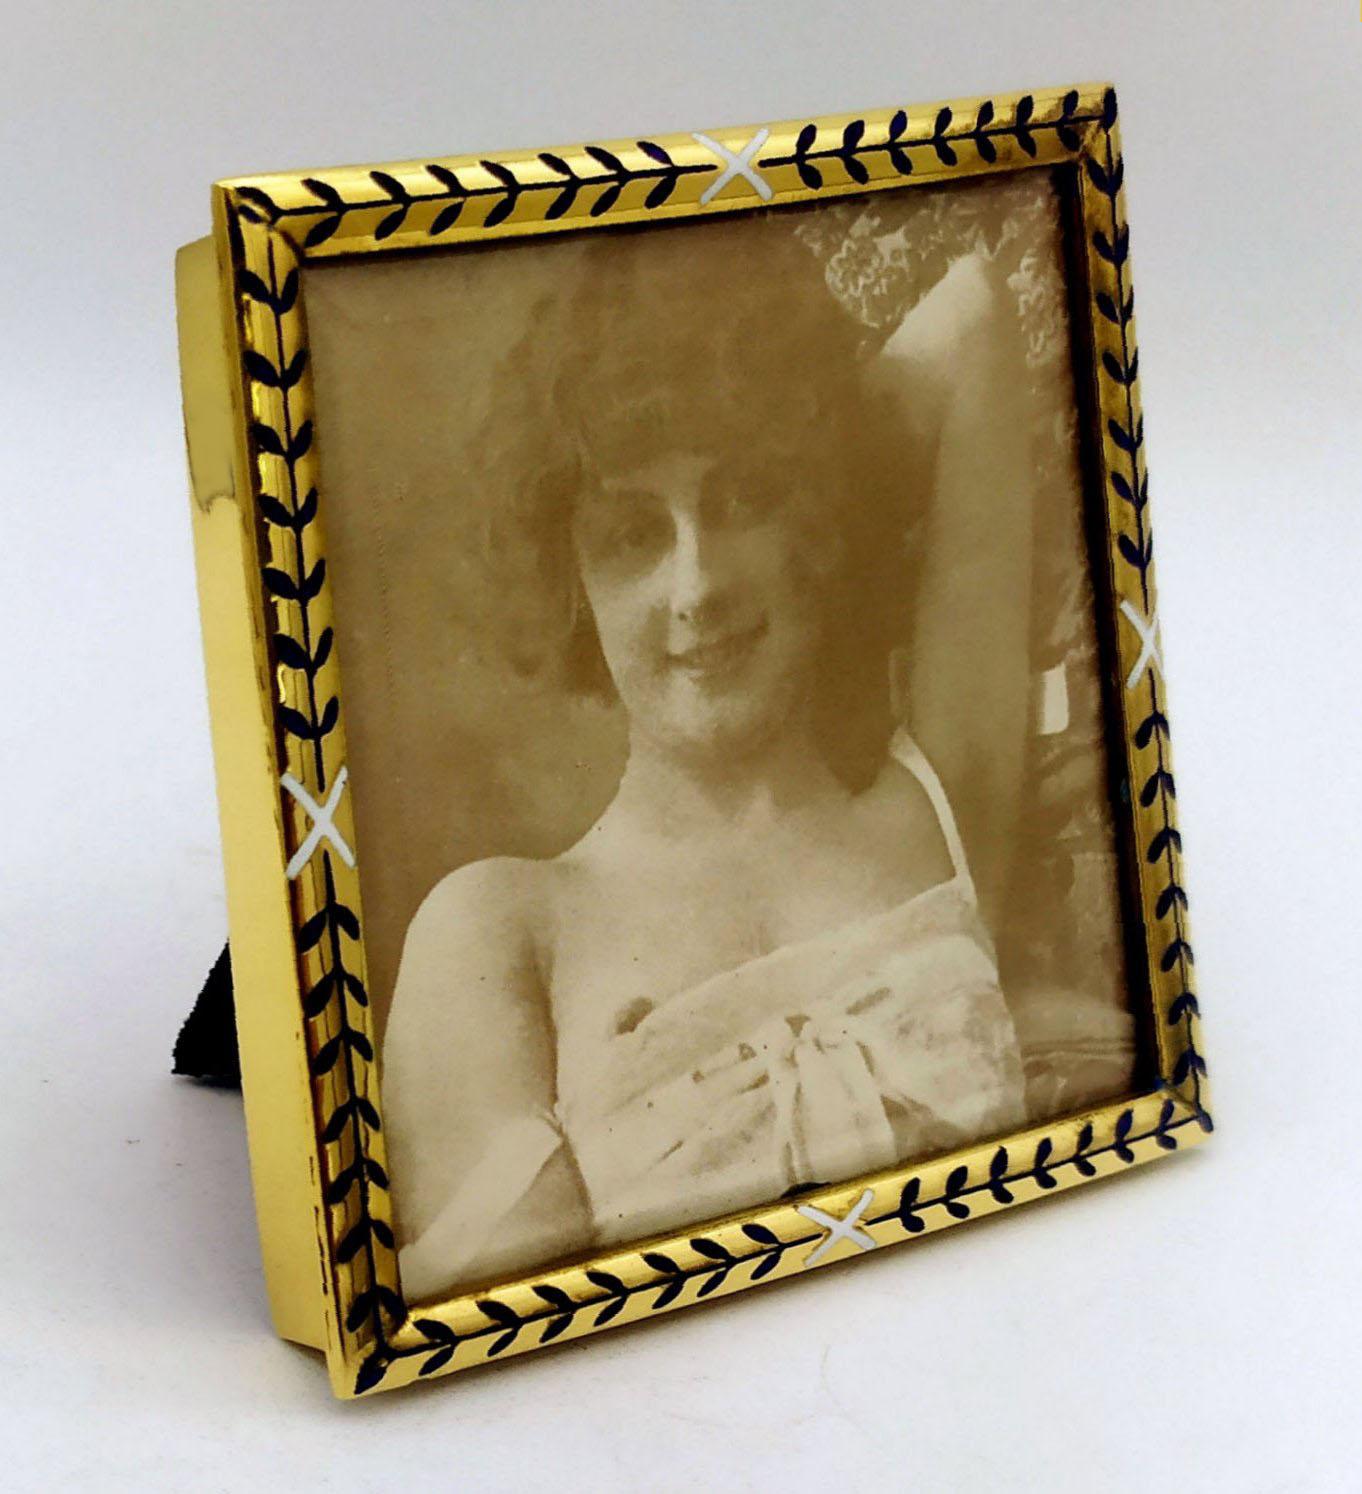 Gold-plated 925/1000 silver square photo frame with fire-enamelled Empire-style leaves on a rounded edge. External dimensions cm. 9 x 9, internal cm. 7.7 x 7.7. Weight gr. 87. Designed by Franco Salimbeni in 1970 and made in Florence in various